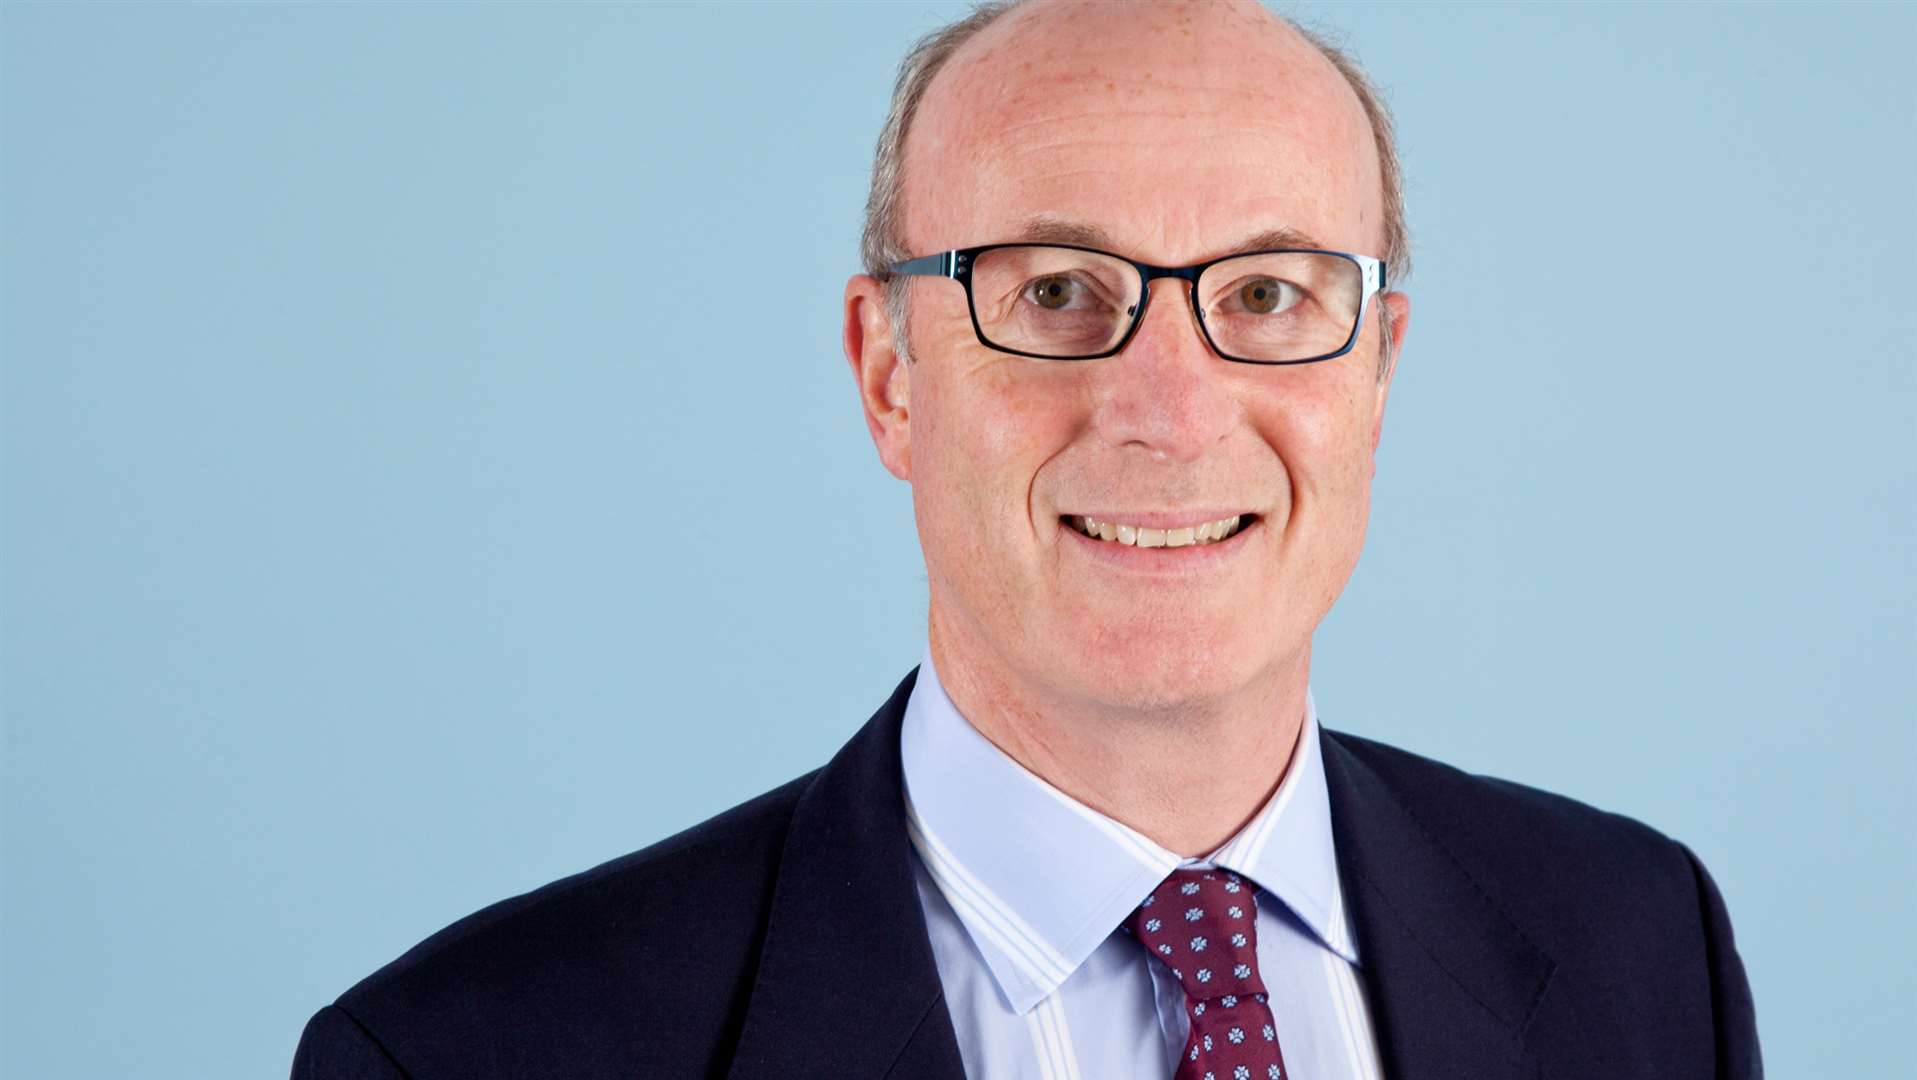 New CEO of Thomson Snell and Passmore, Simon Slater